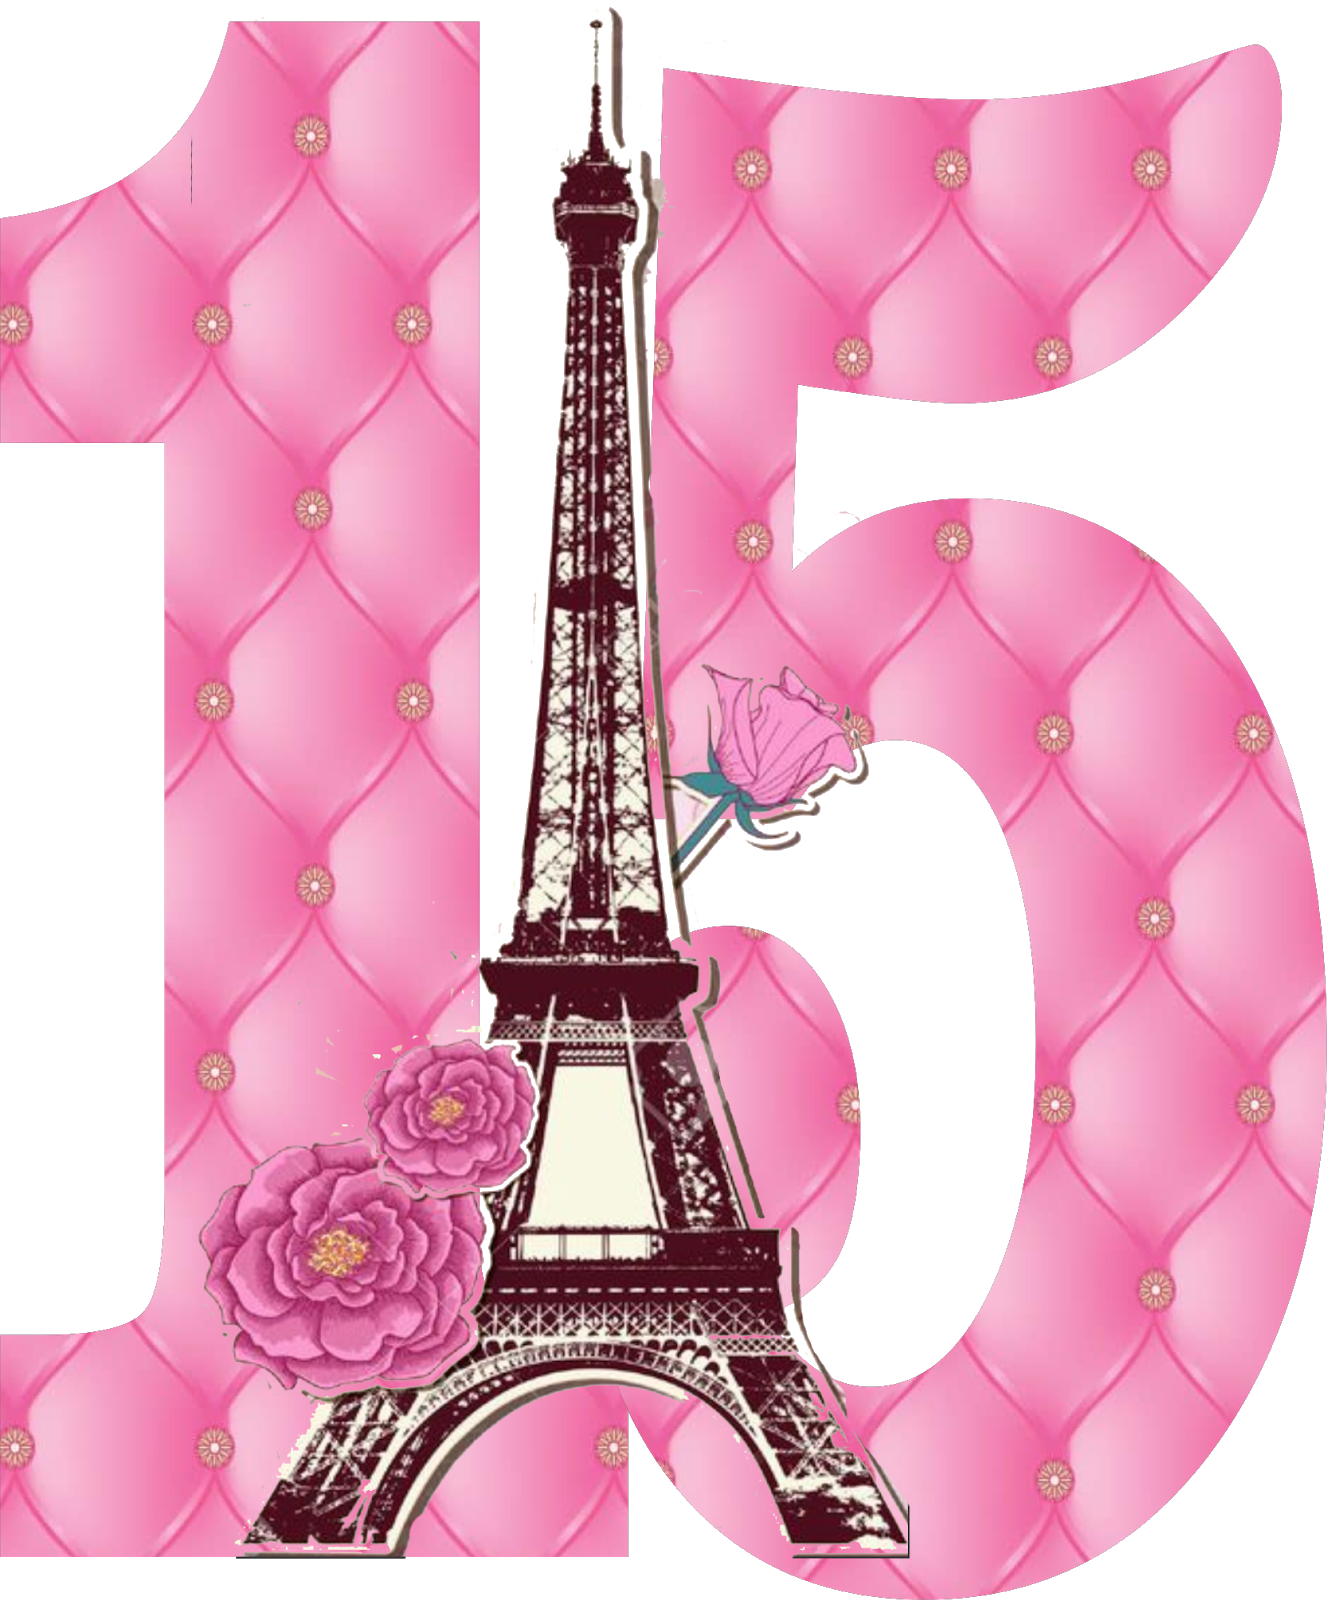 A Pink Number With A Tower And Flowers